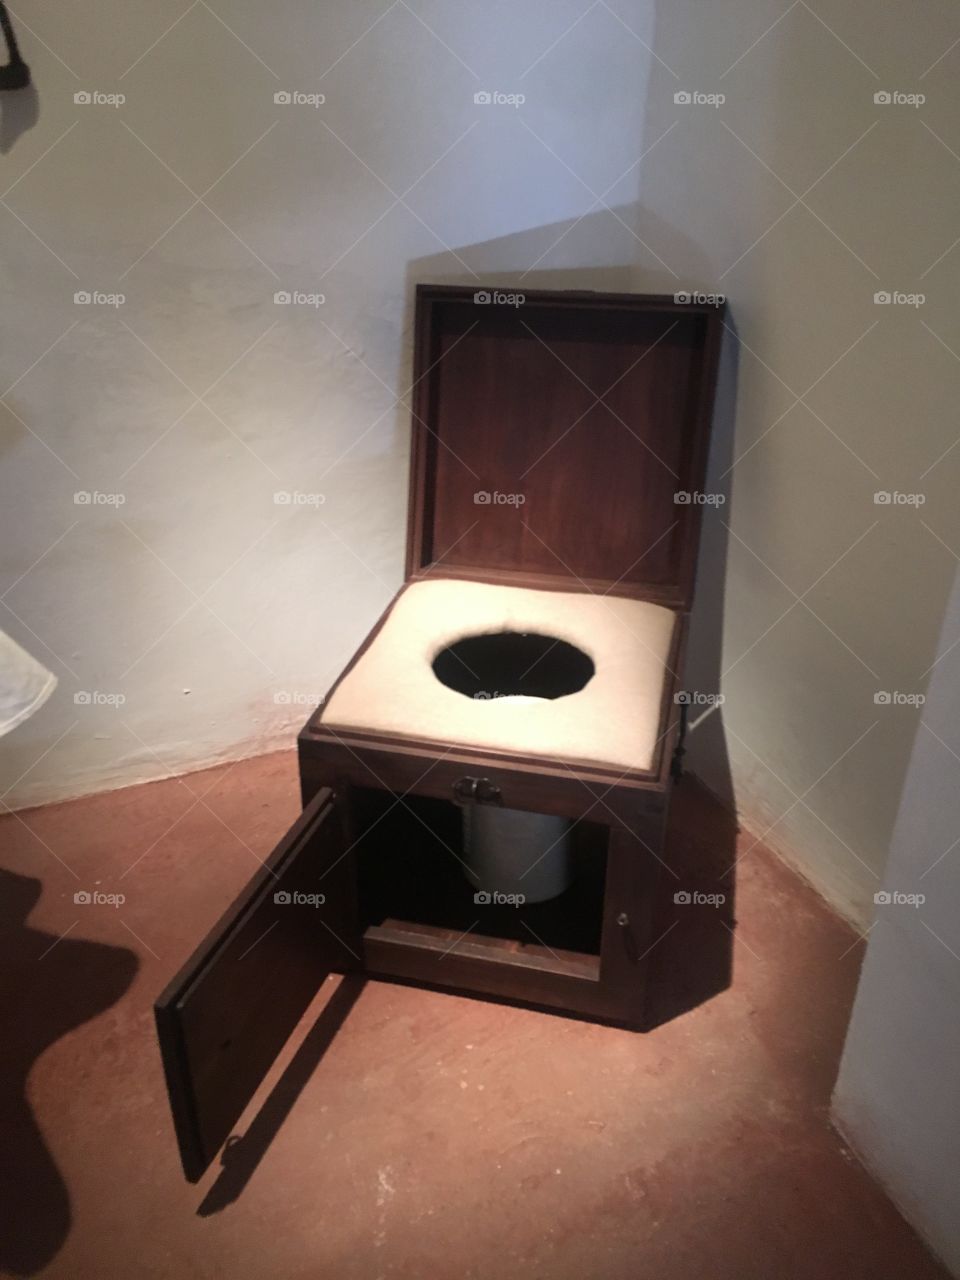 The royal throne- back in the day the royal in Spain use to have these comfy toilets. They consist of a wooden box with a cushion attached to the seat and underneath and removable bucket. Sit back and enjoy relief!  